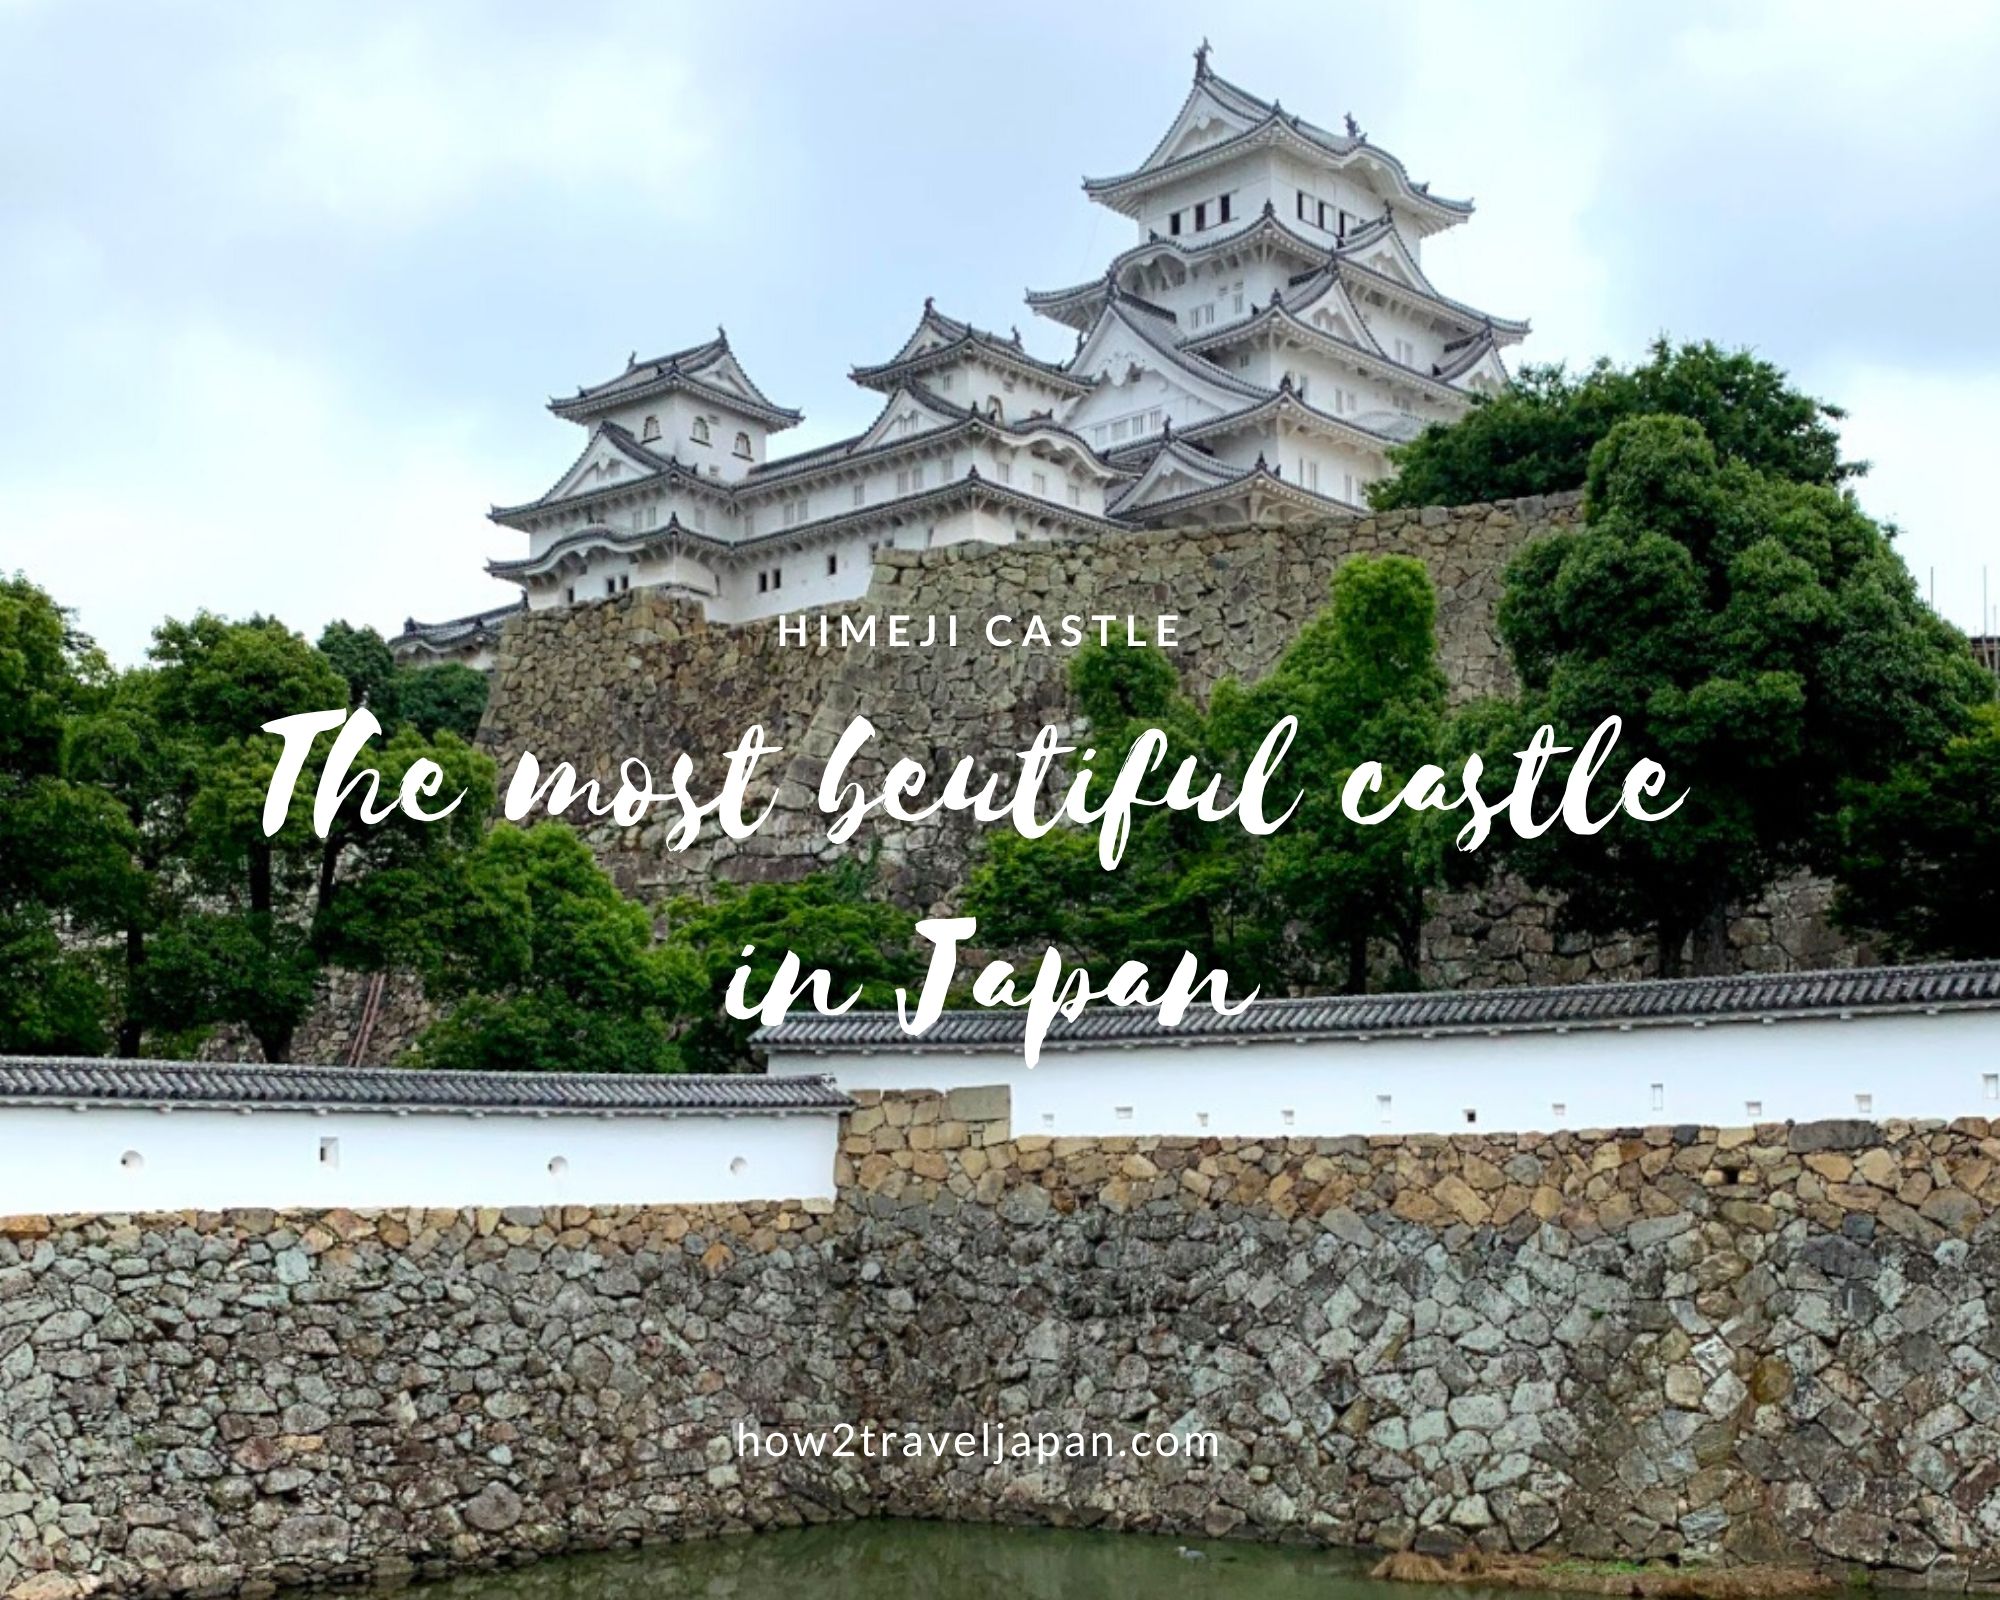 You are currently viewing The castle of the Abarenbo Shogun “Himeji Castel”